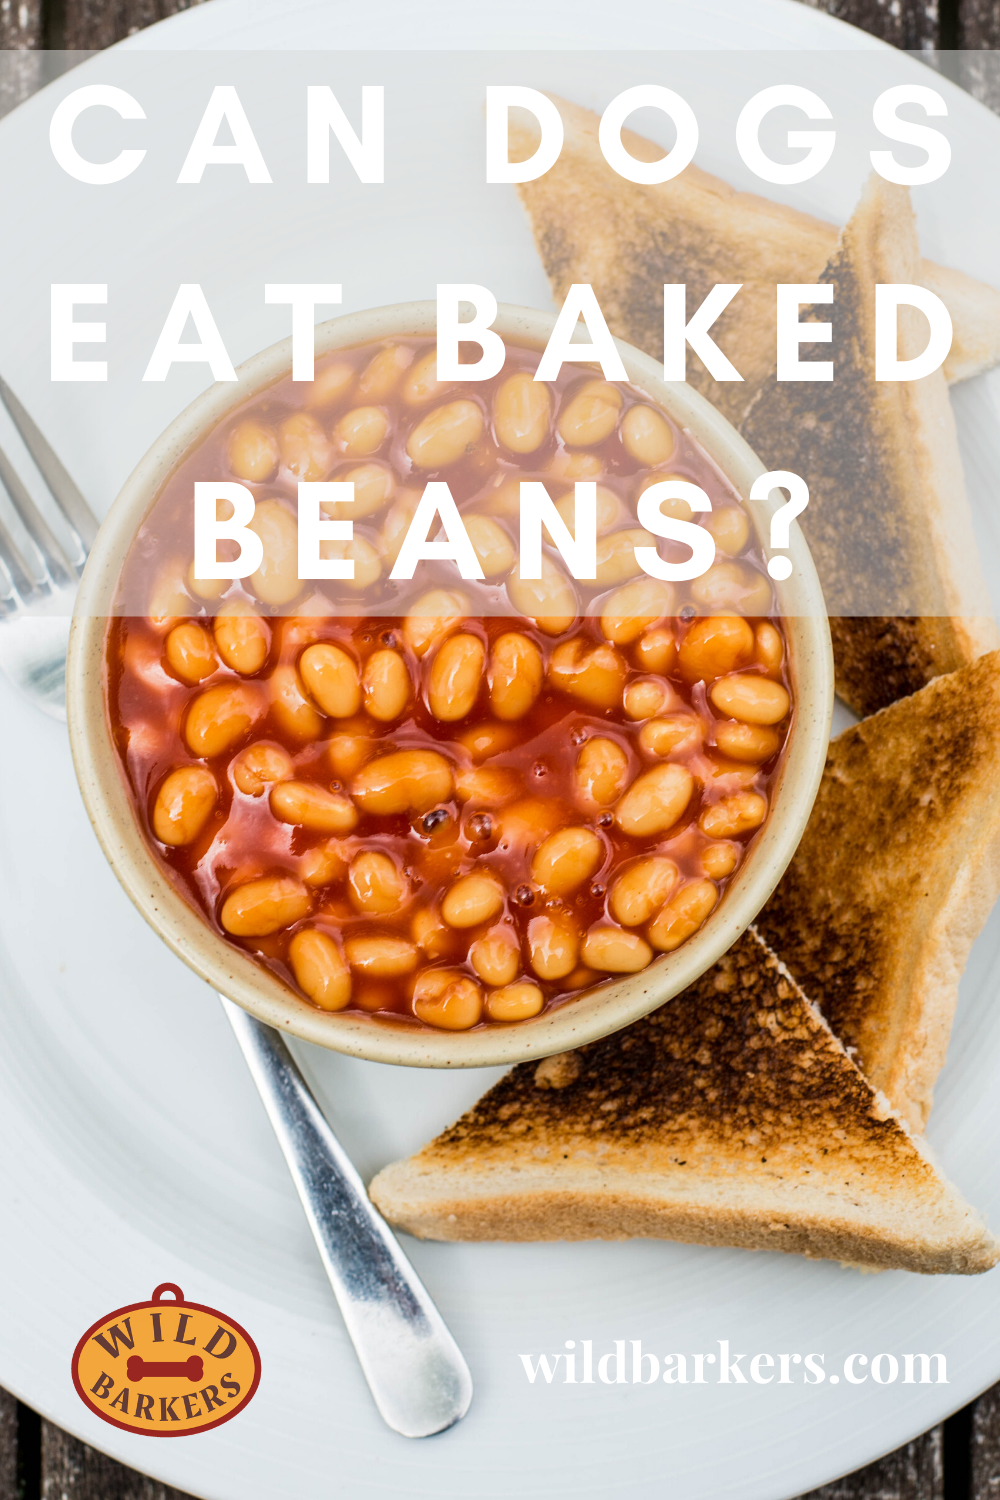 Can Dogs Eat Baked Beans? Toxic? Safe?